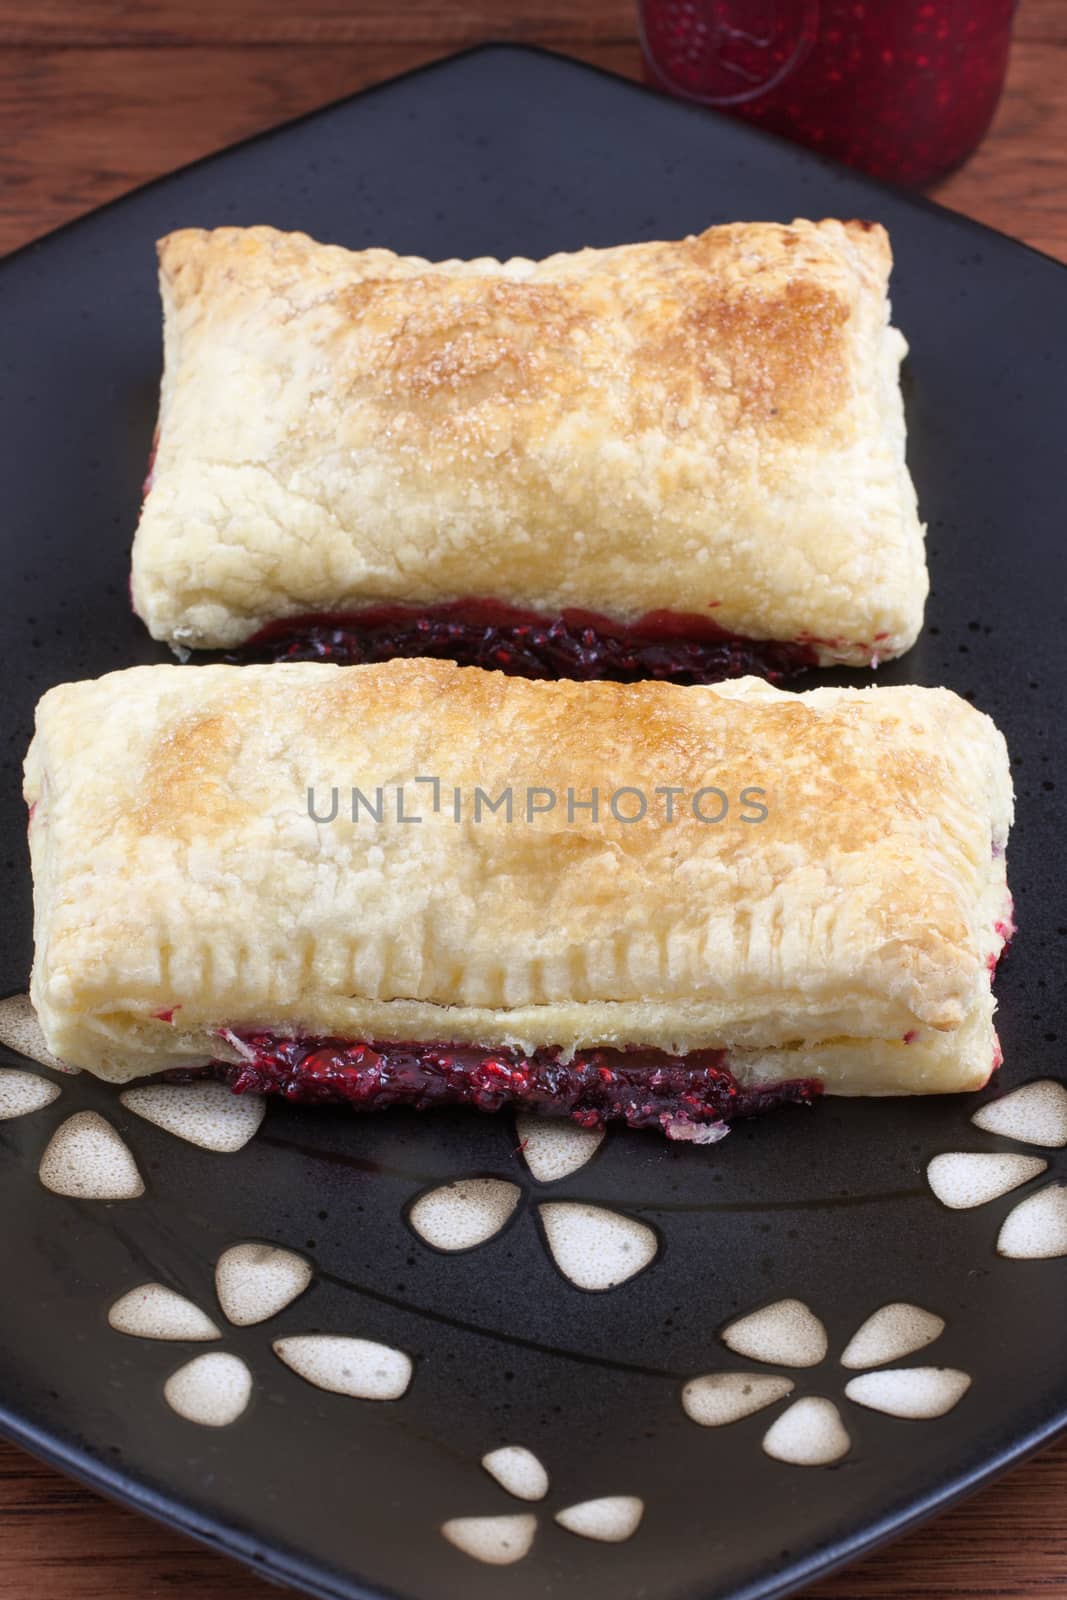 Raspberry Turnovers by SouthernLightStudios